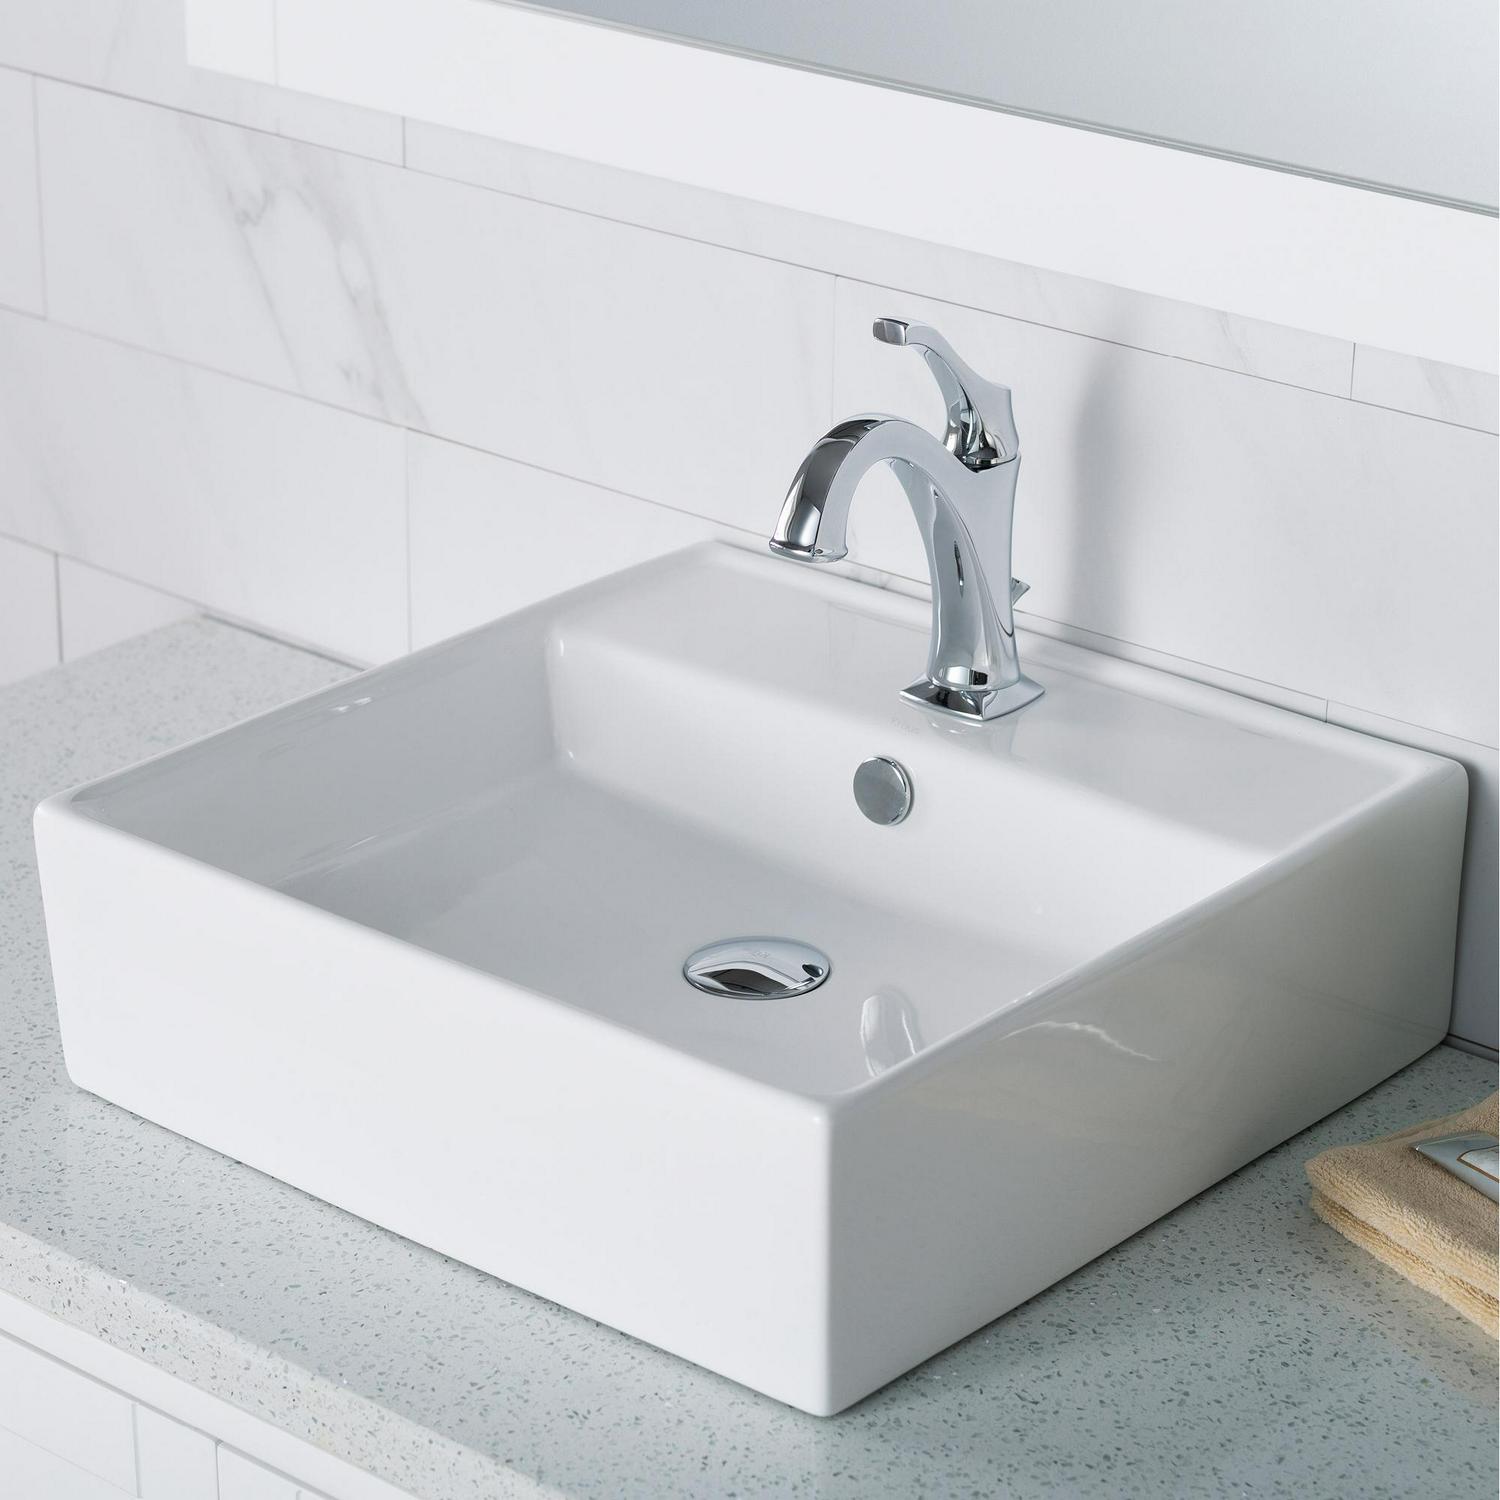 KRAUS Elavo 18 1/2-inch Square White Porcelain Ceramic Bathroom Vessel Sink with Overflow and Arlo Faucet Combo Set with Lift Rod Drain， Chrome Finish